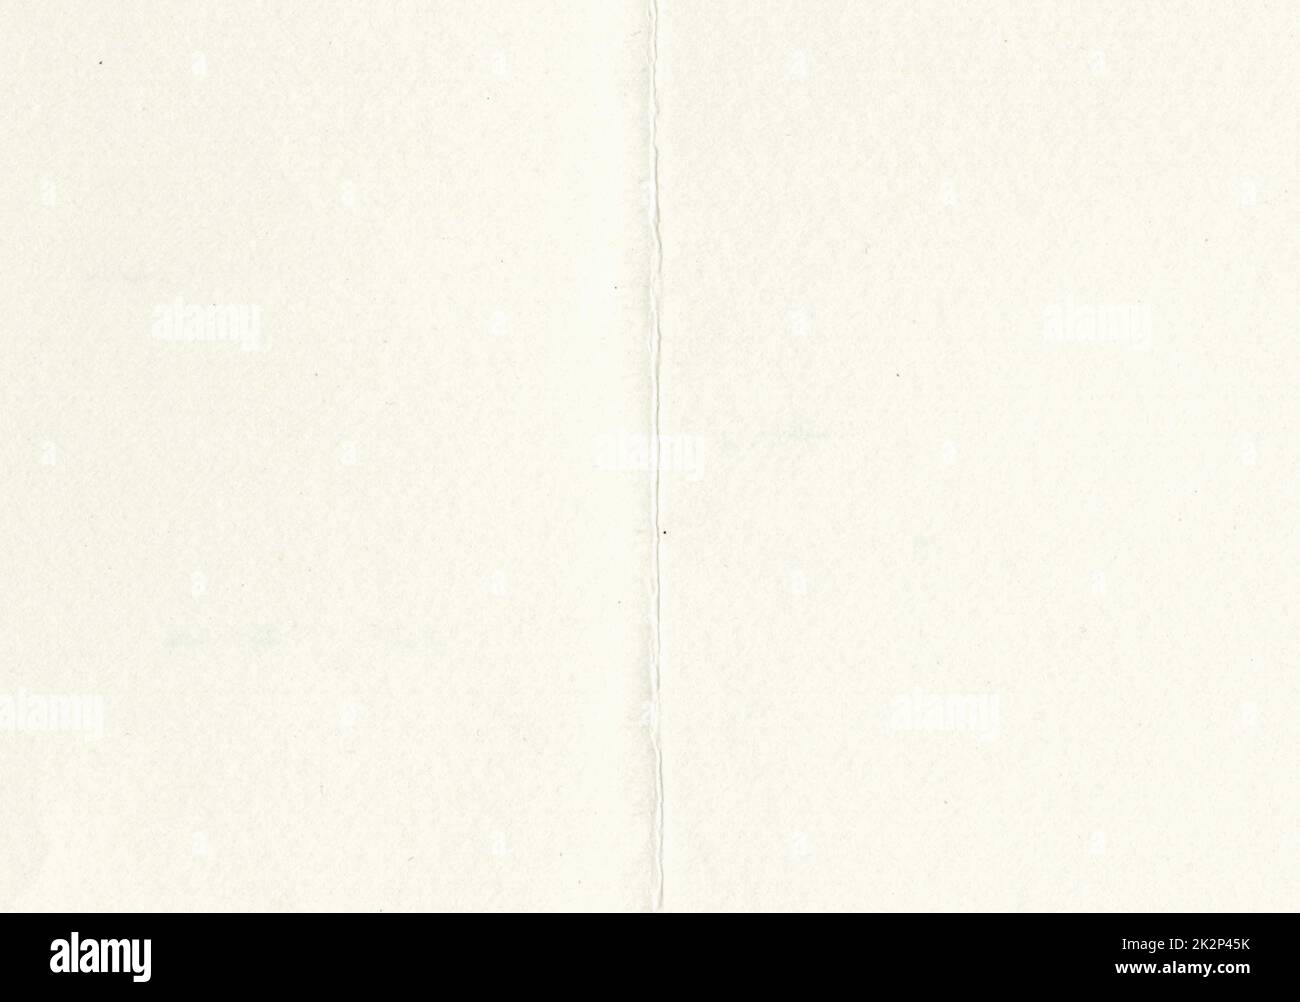 Large image of close up paper texture background folded in half with aged, uncoated fine fiber grain and dust particles in light beige yellowed color smooth with copy space for text wallpaper designs Stock Photo